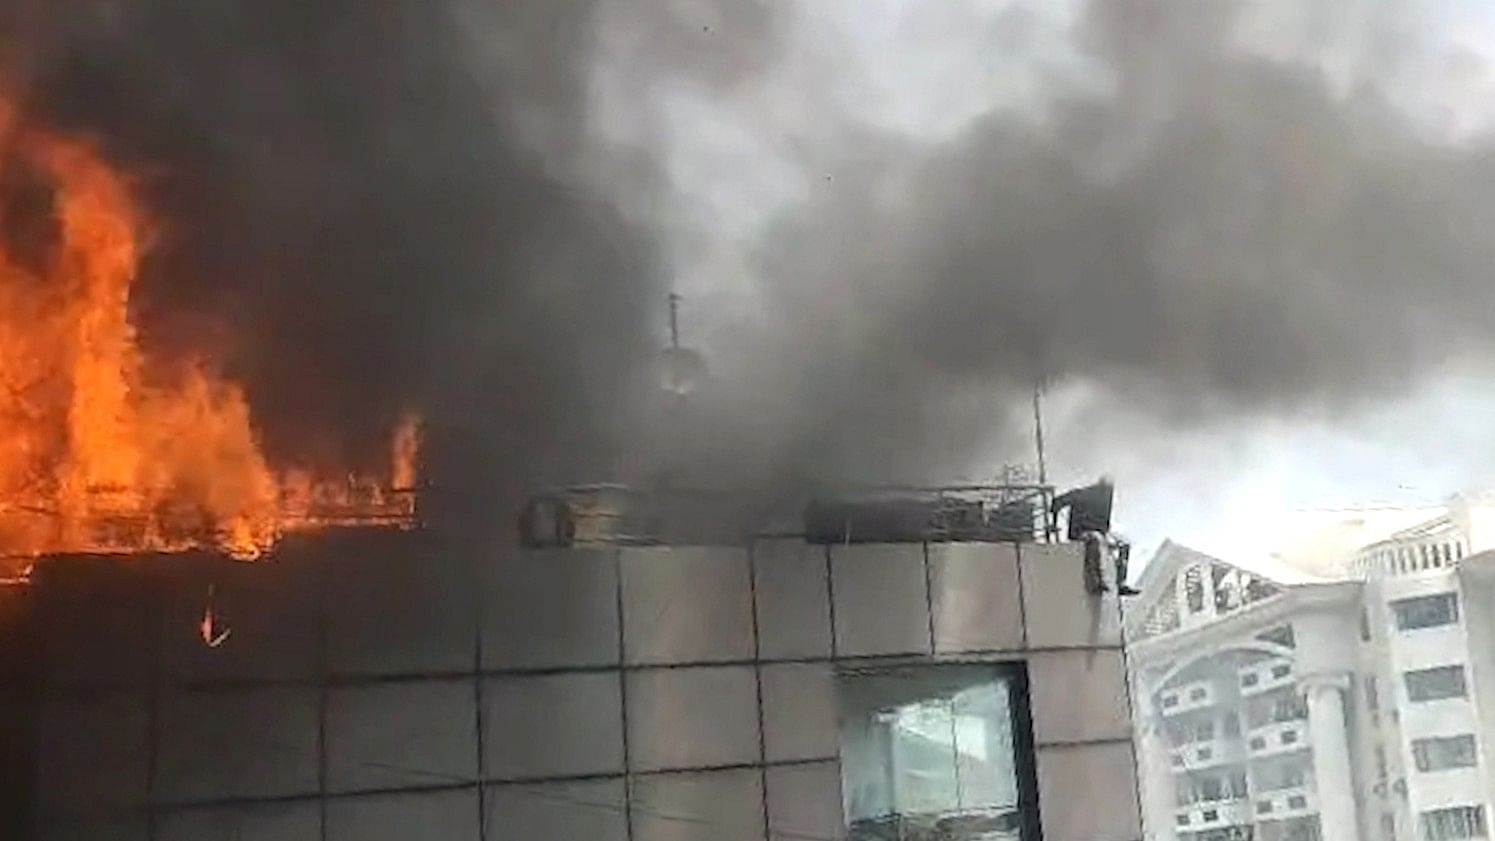 <div class="paragraphs"><p>The cafe's chef is seen jumping off the fourth floor of the building to escape the fire. The 29-year-old is said to be critical with multiple injuries. </p></div>